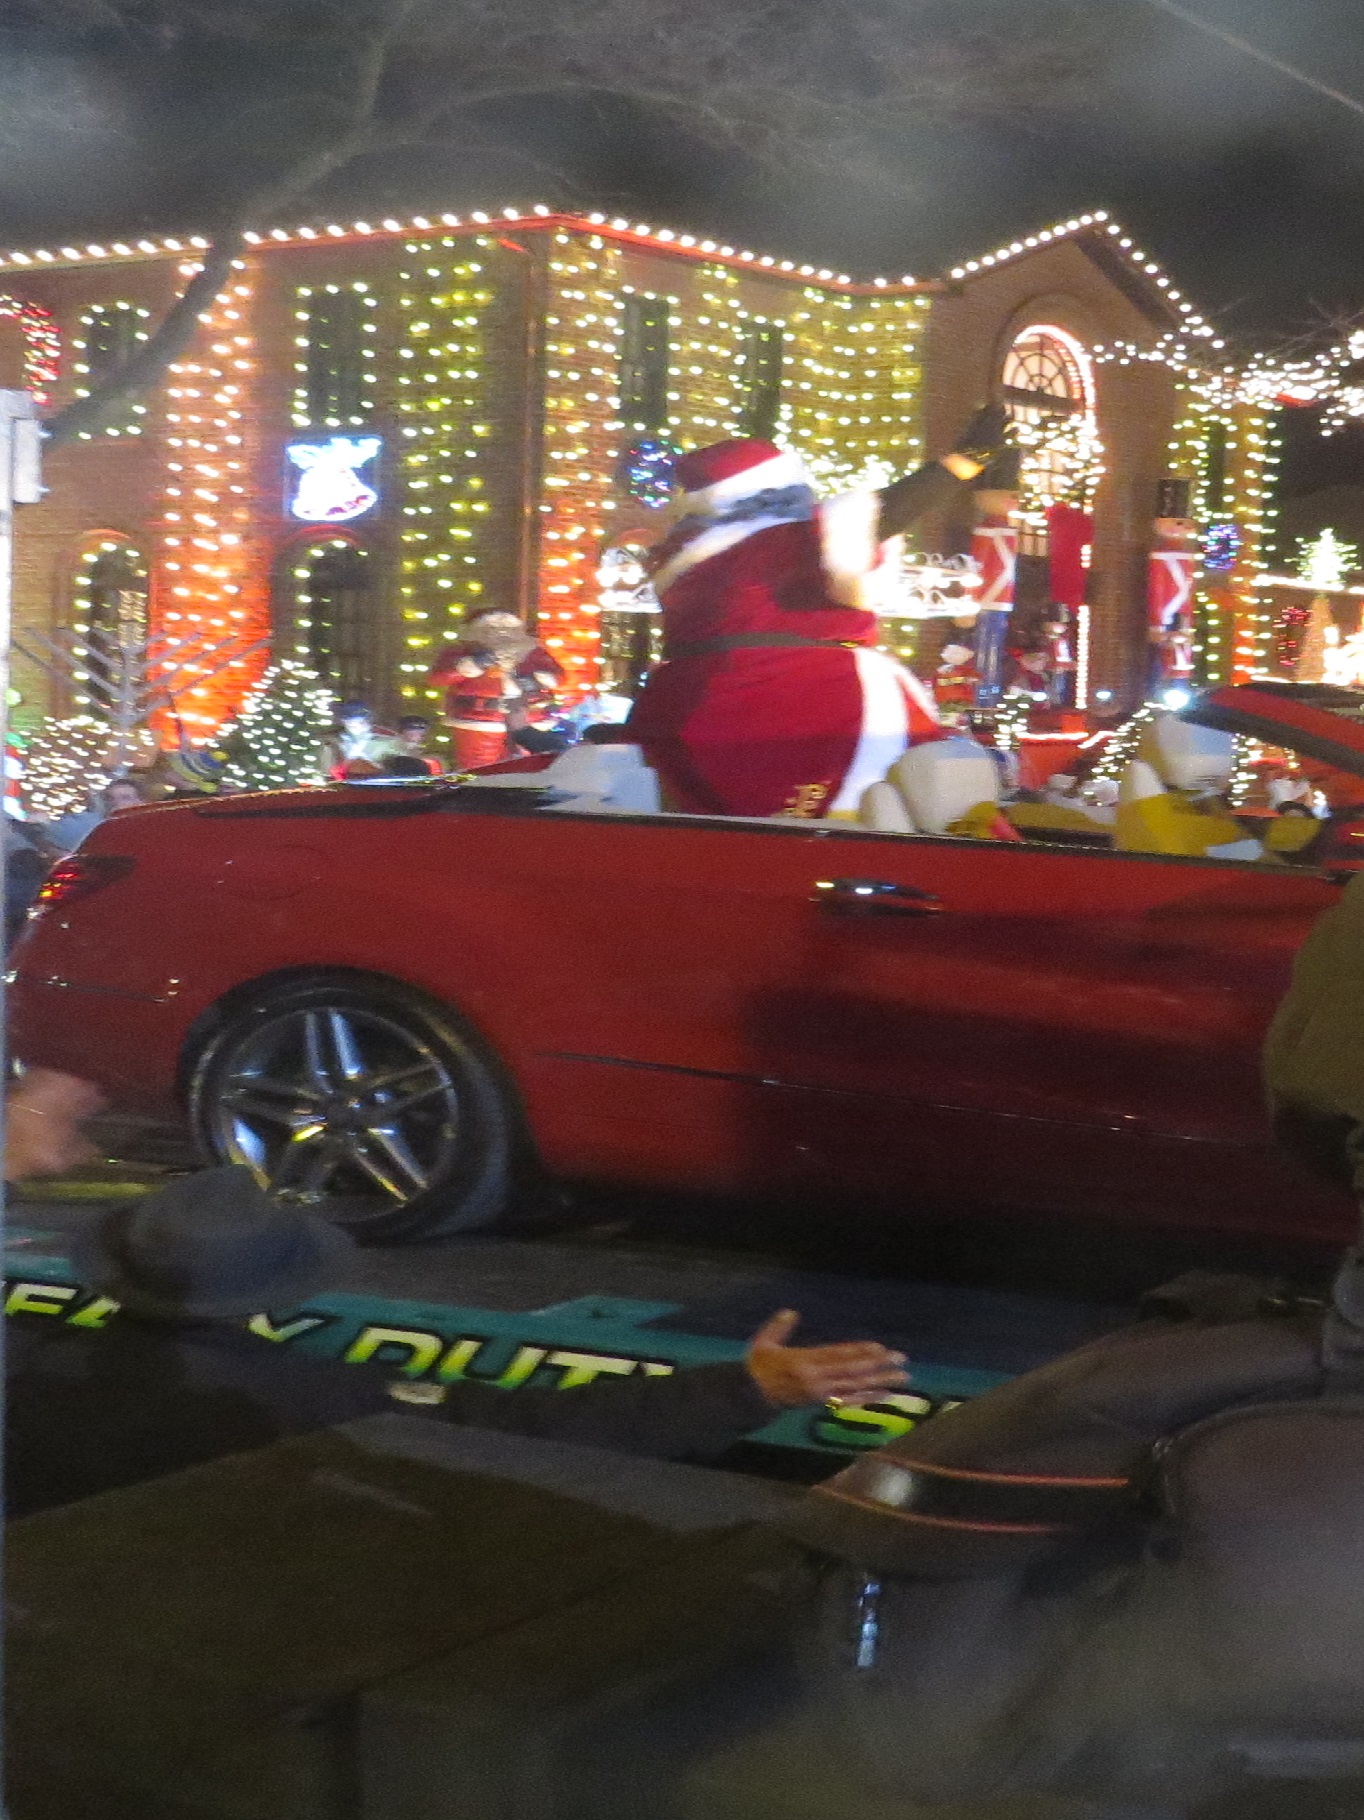 Mrs. Claus arrived in style on a Mercedes sled. The car was later raffled off as a prize after tickets were sold to raise money for JDRF.